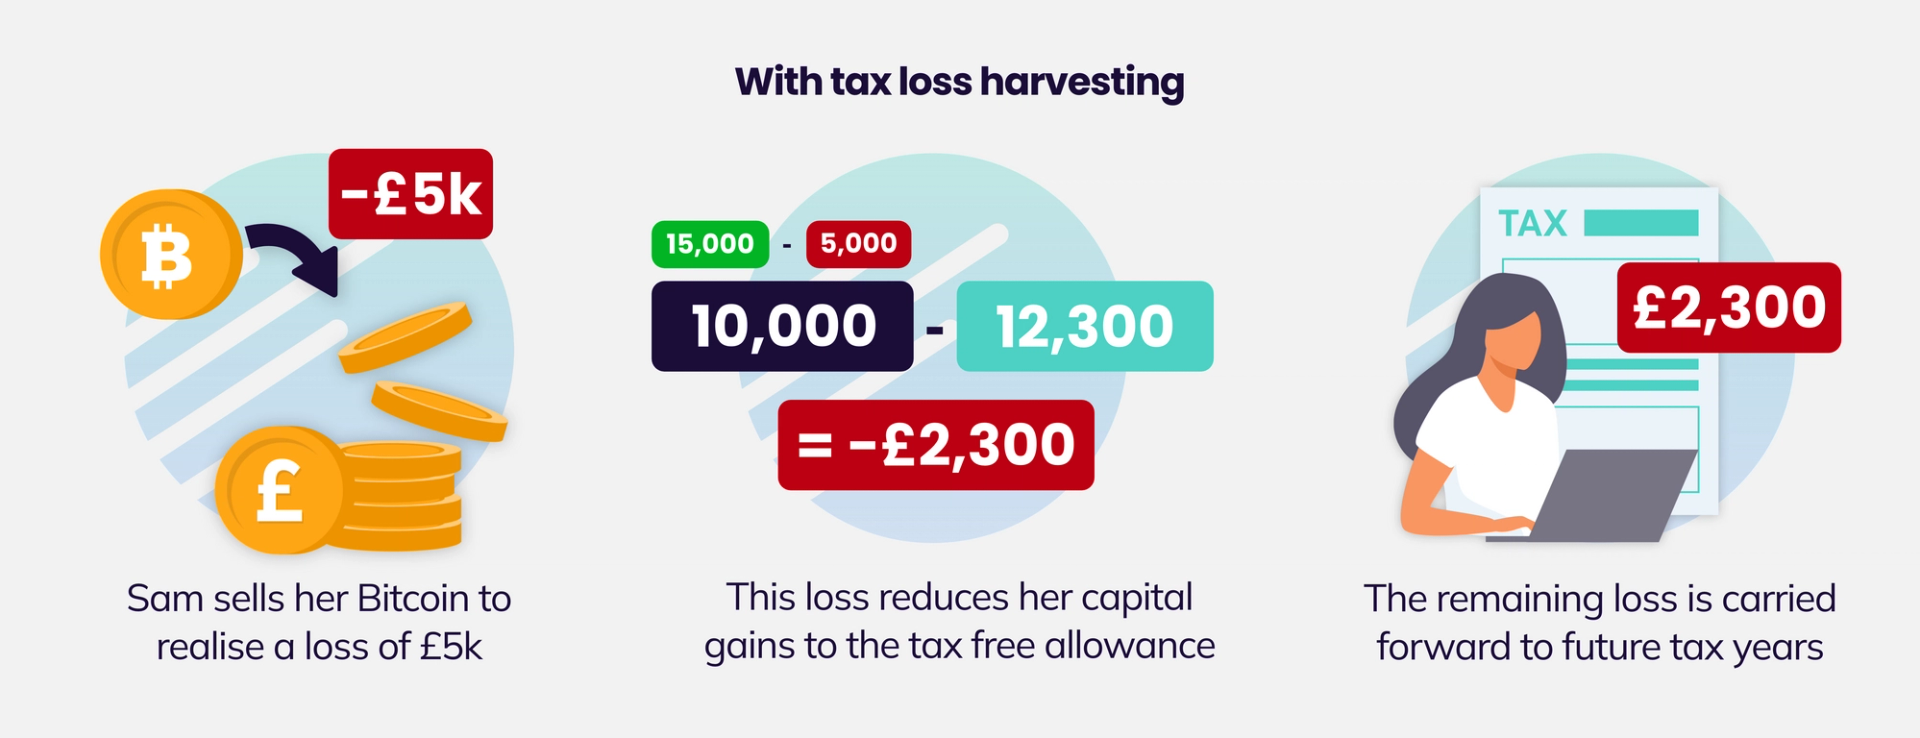 With tax loss harvesting